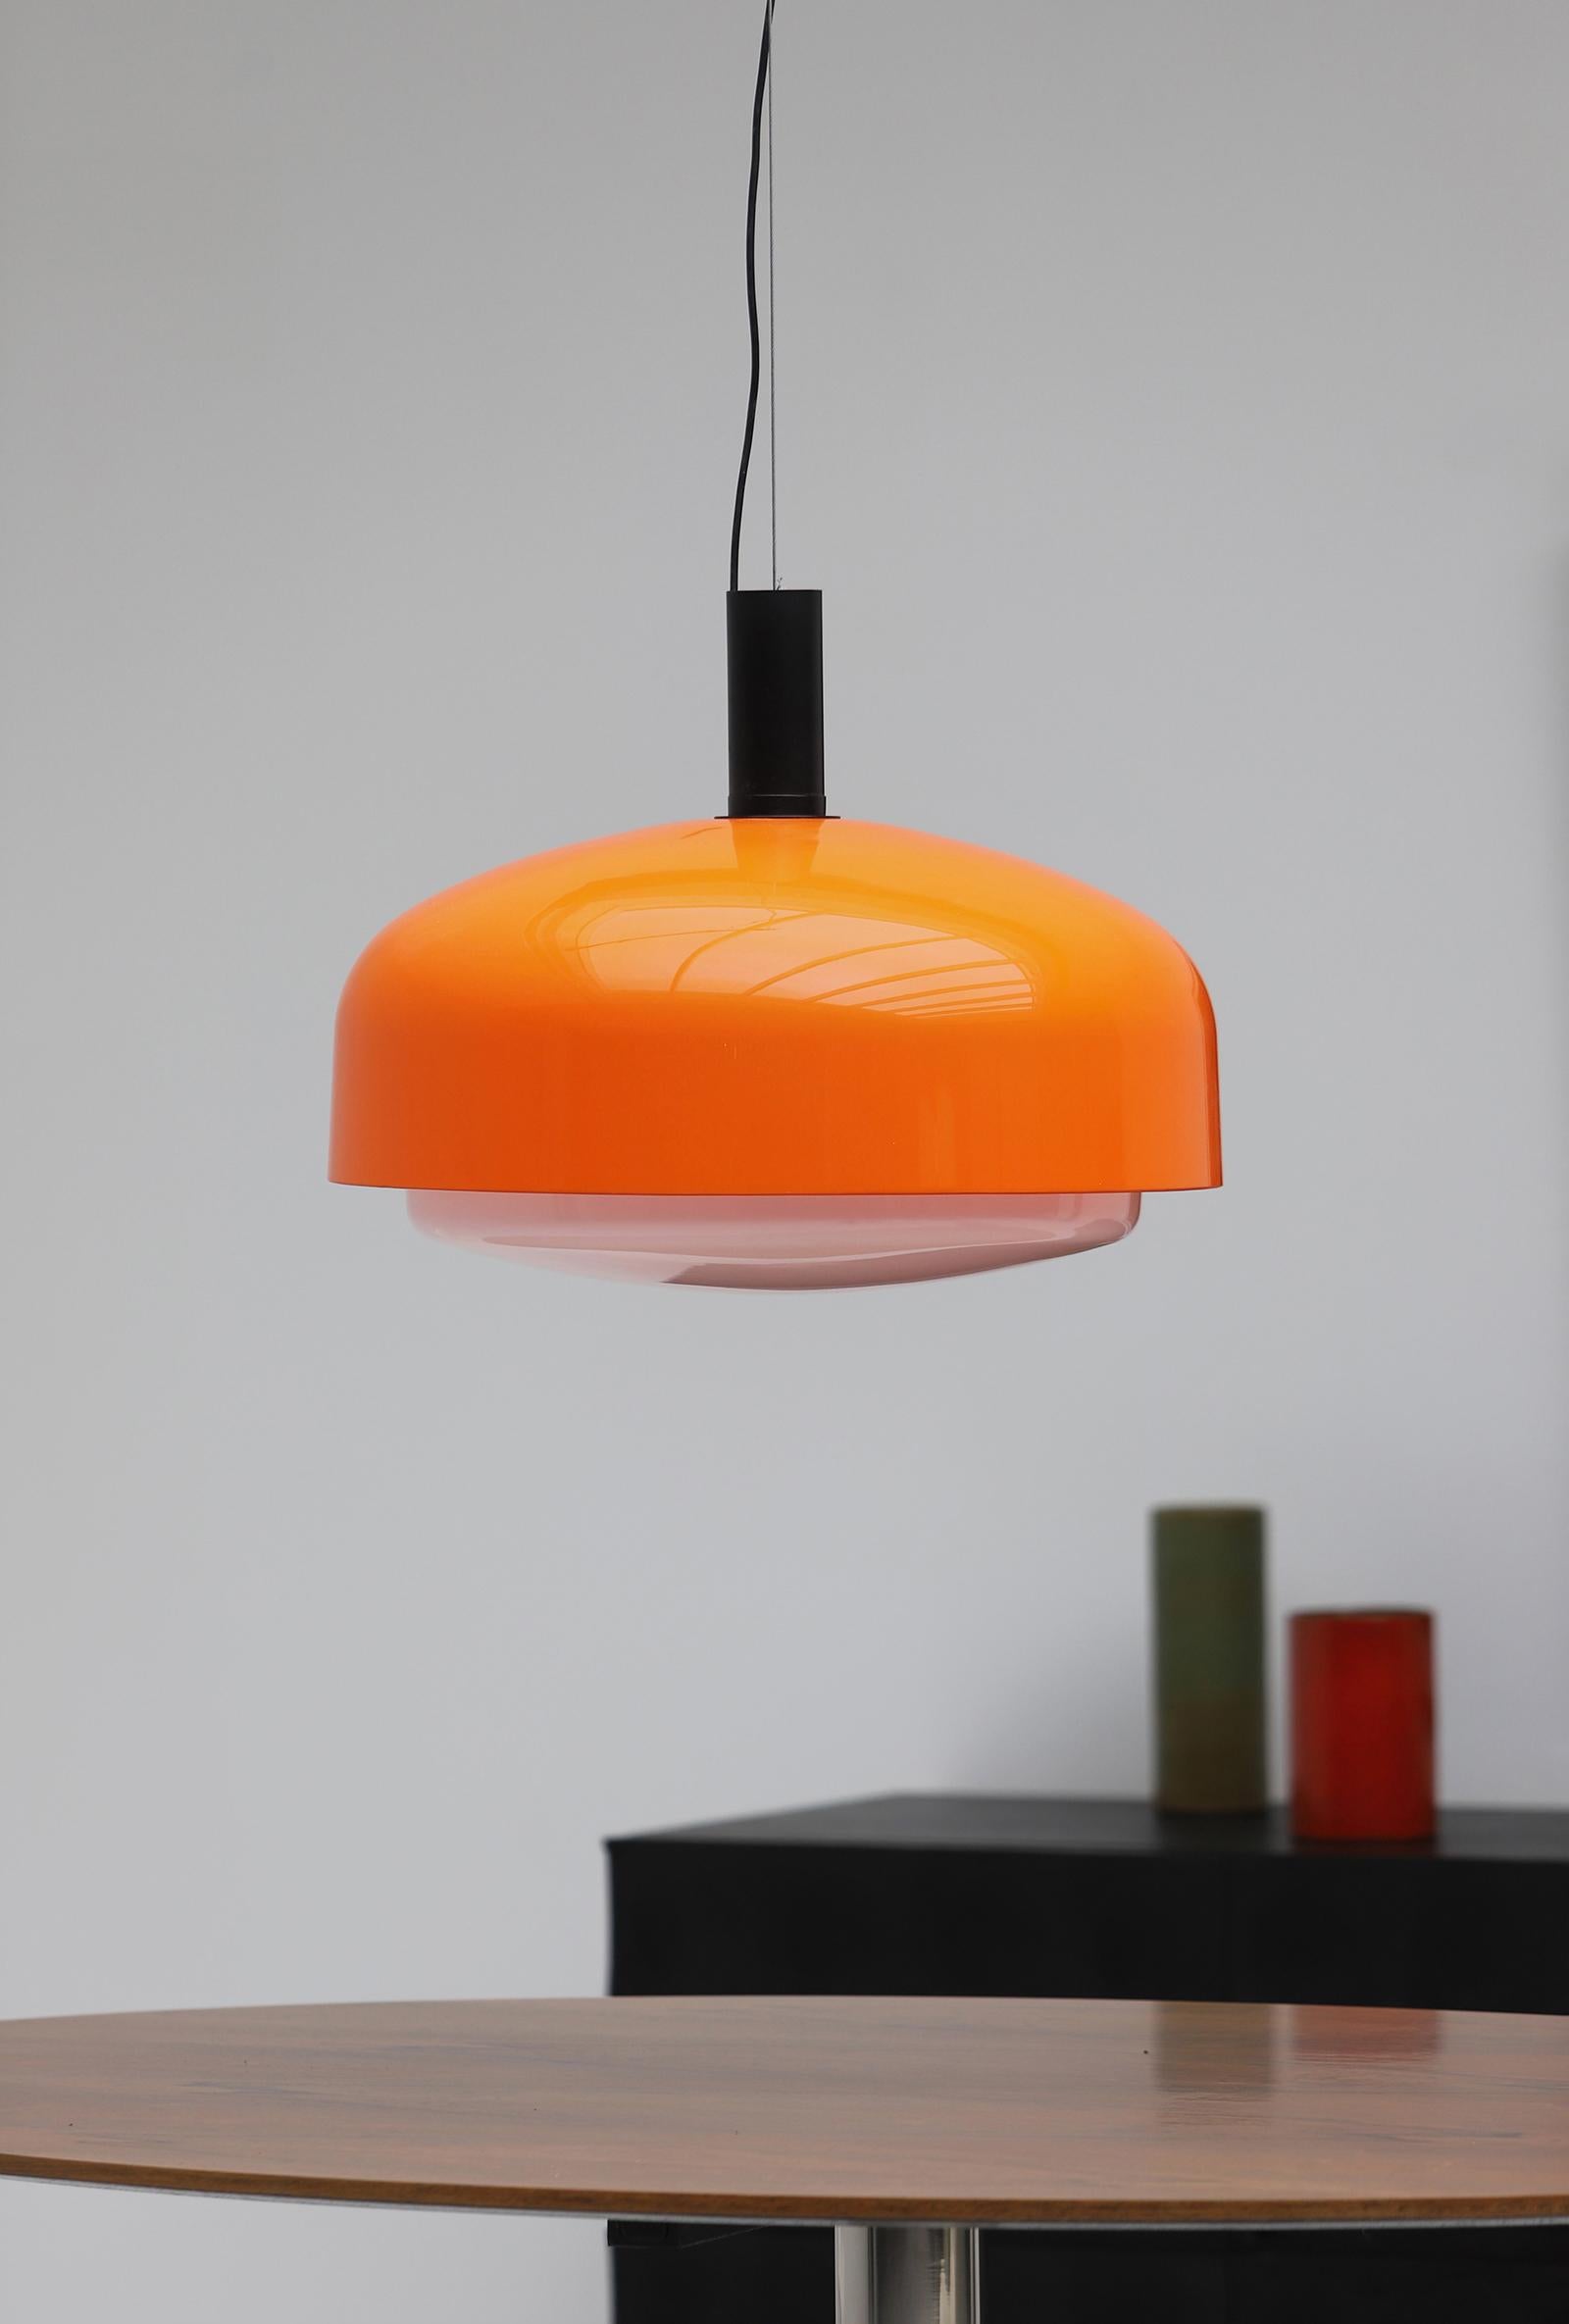 Large pending lamp by Eugenio Gentili Tedeschi model KD 62 designed for Kartell in 1965. The lamp has a white acrylic orange and white shade and is finished with metal details. This sizable pendant light stands in a very good condition, no chips or